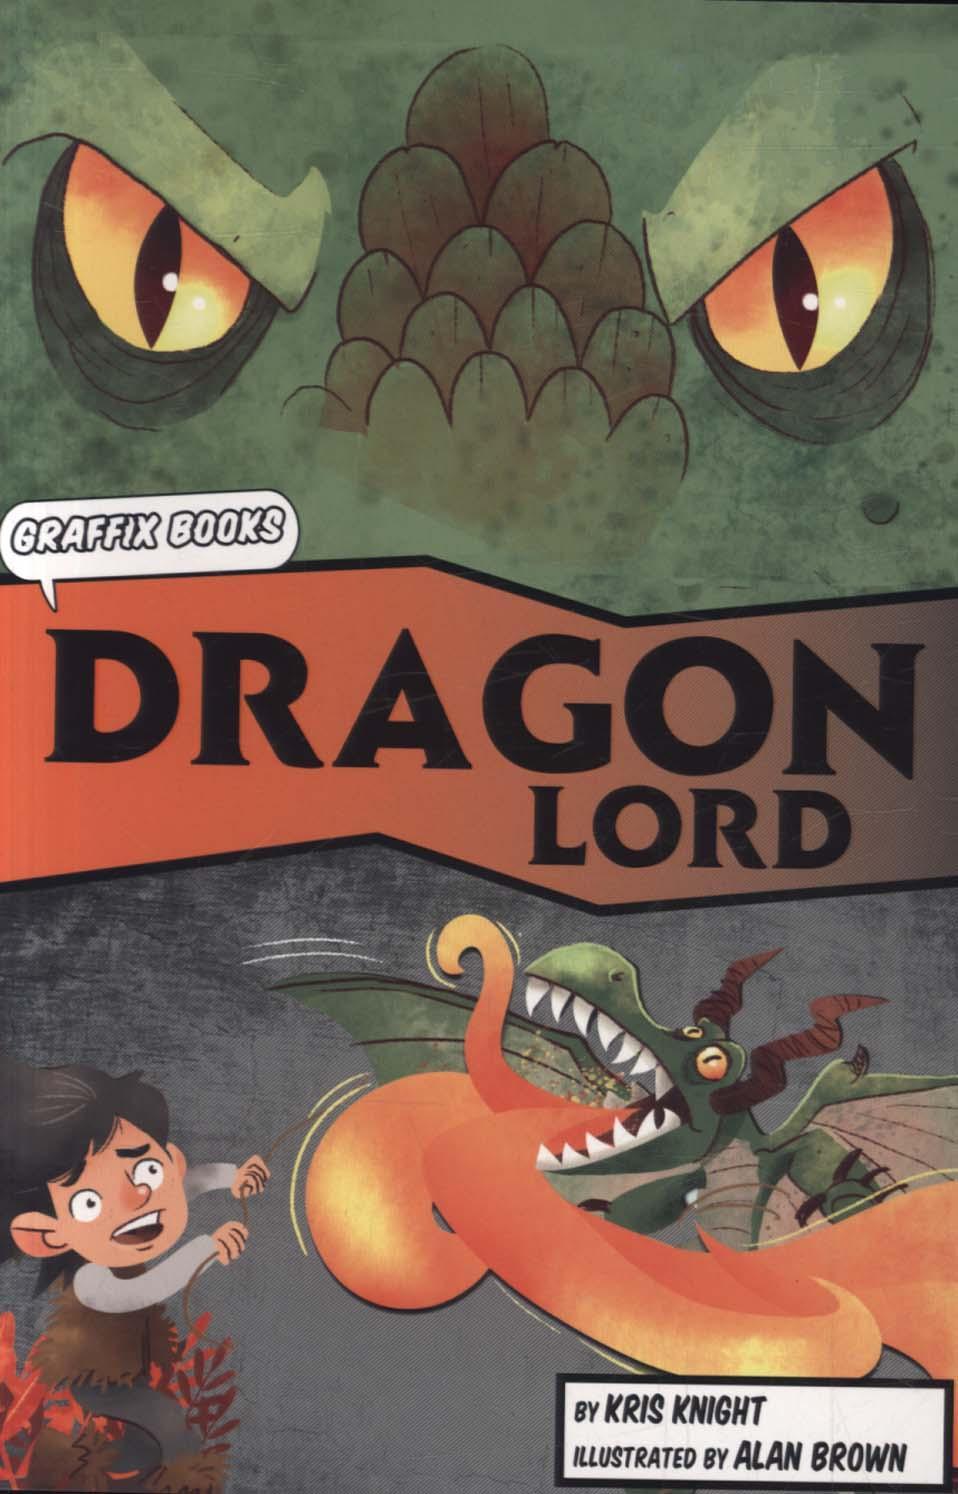 Dragon Lord (Graphic Reluctant Reader)